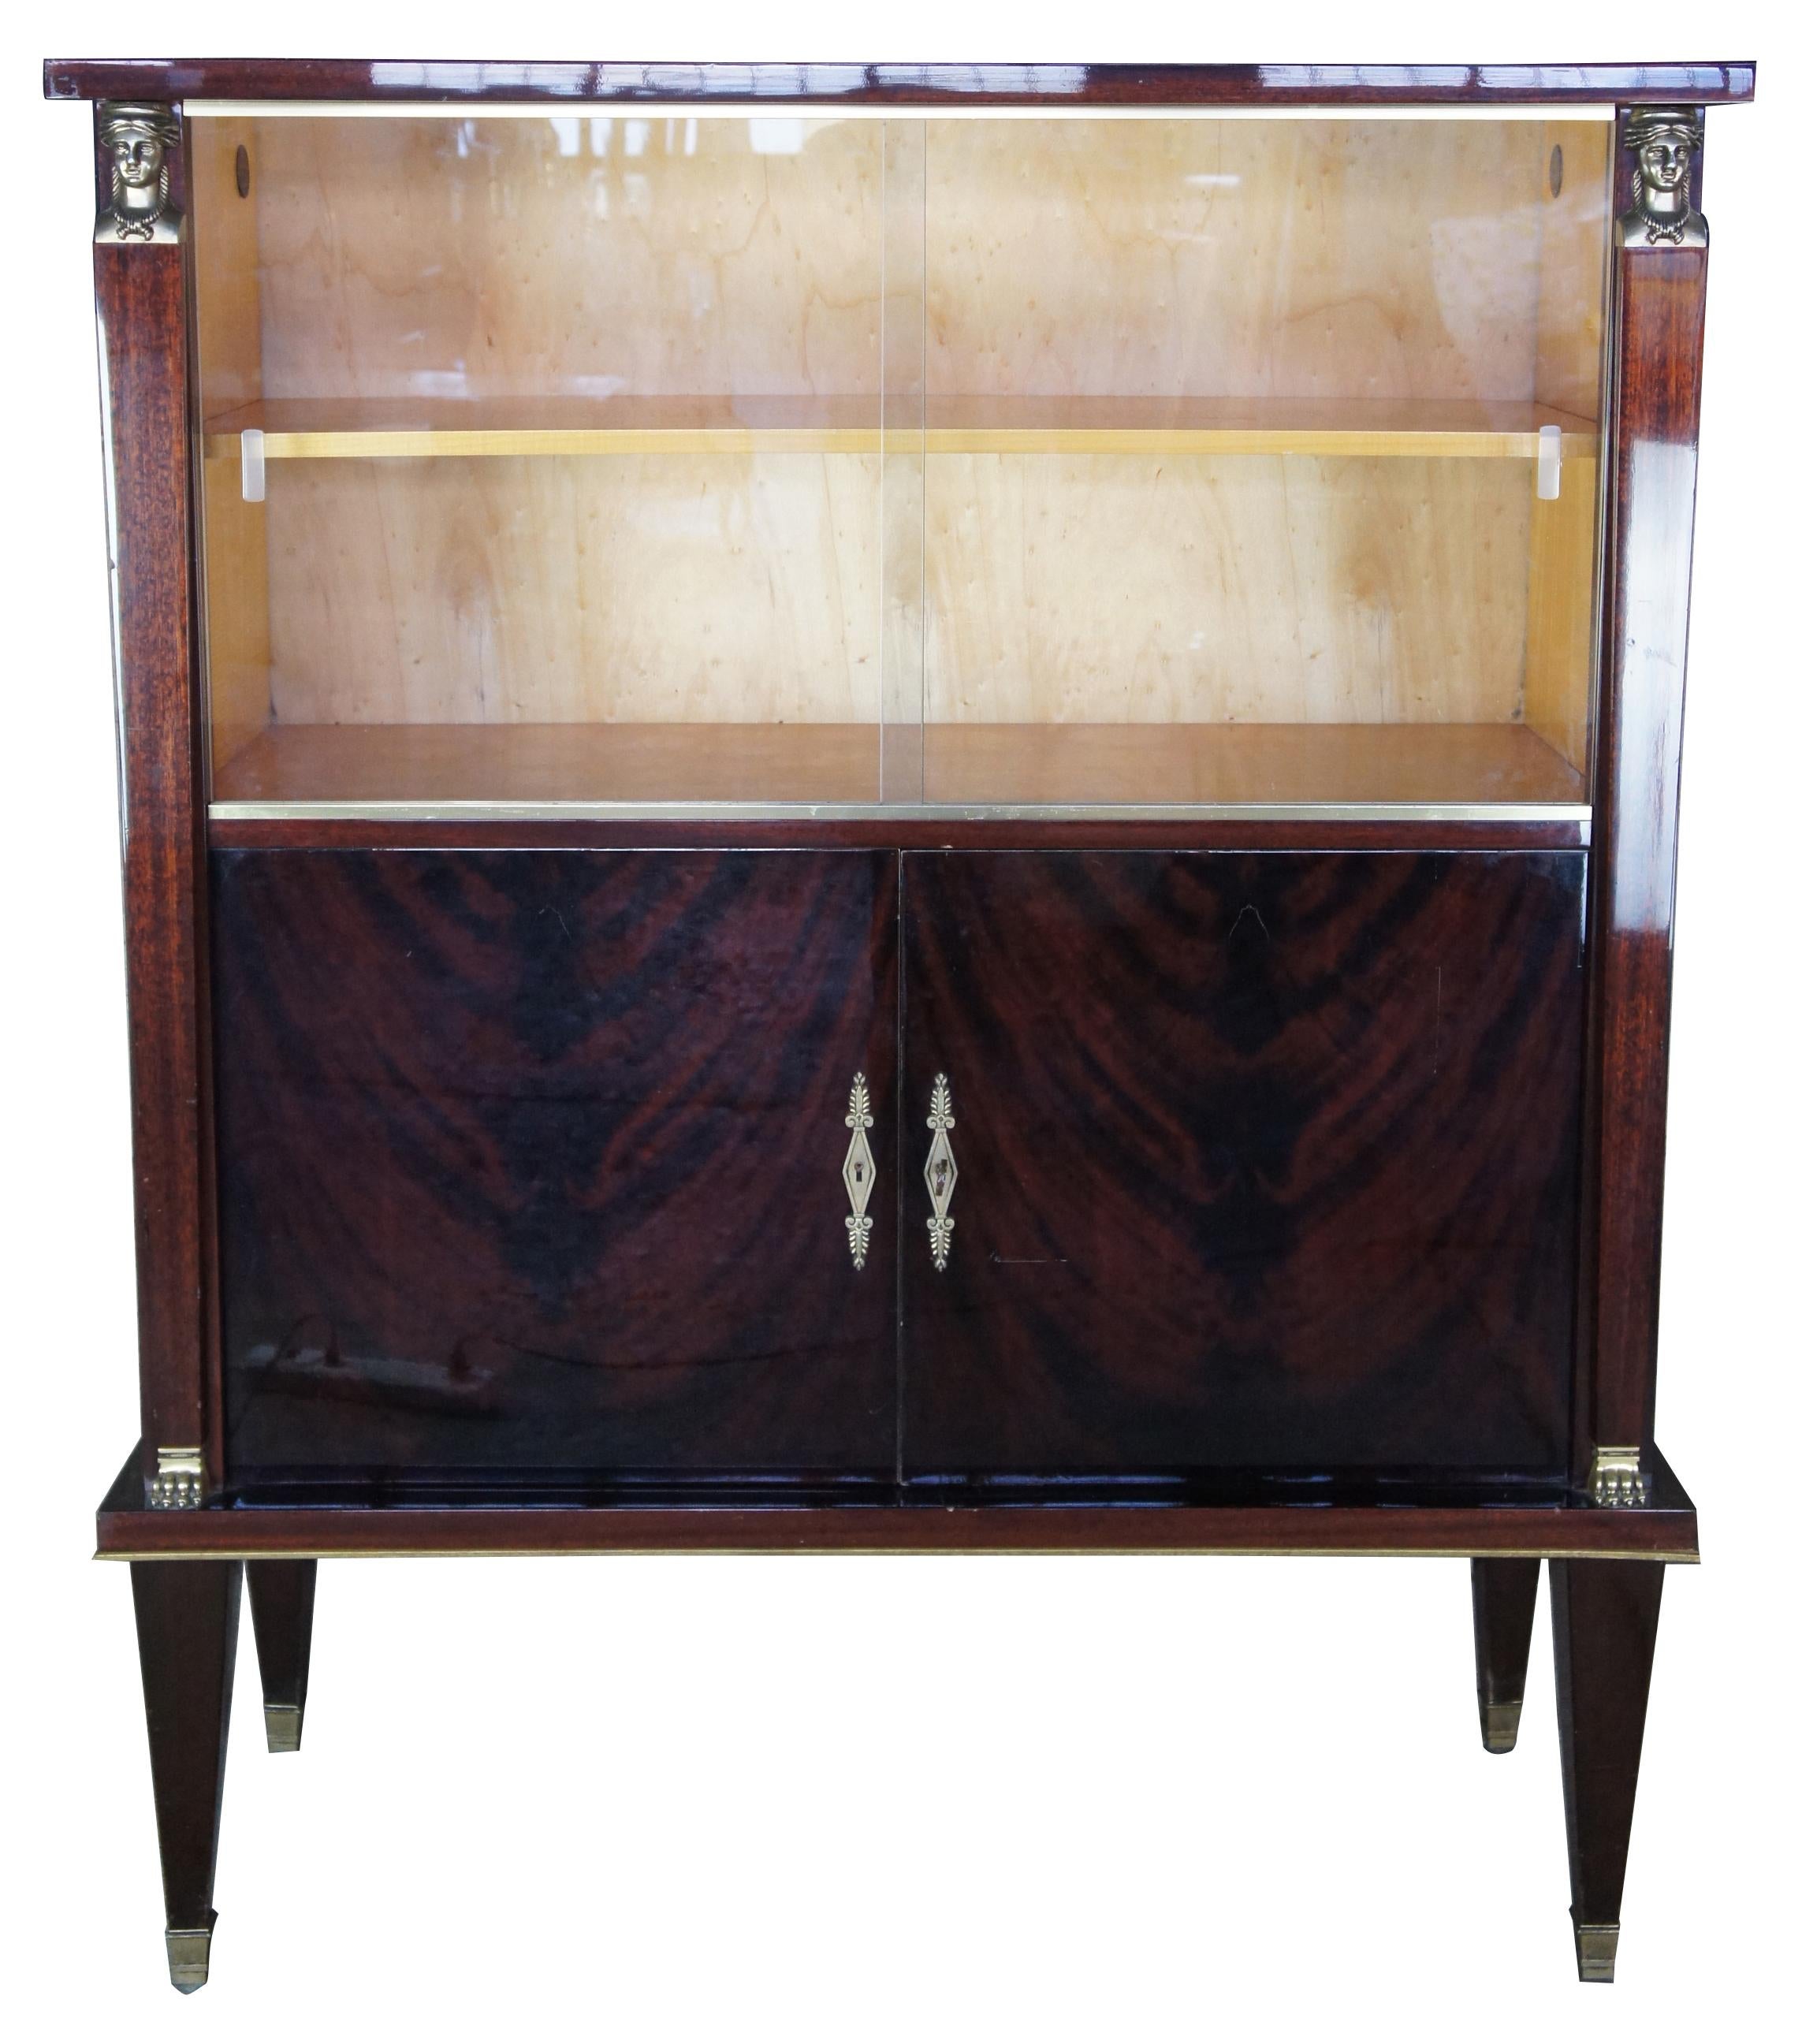 Egyptian Revival crotch mahogany and maple bar library bookcase Art Deco style

Egyptian Revival cabinet with bookshelves. Features mahogany with crotch front doors, great for use as bar back. Features figural brass mounts, glass doors, and maple